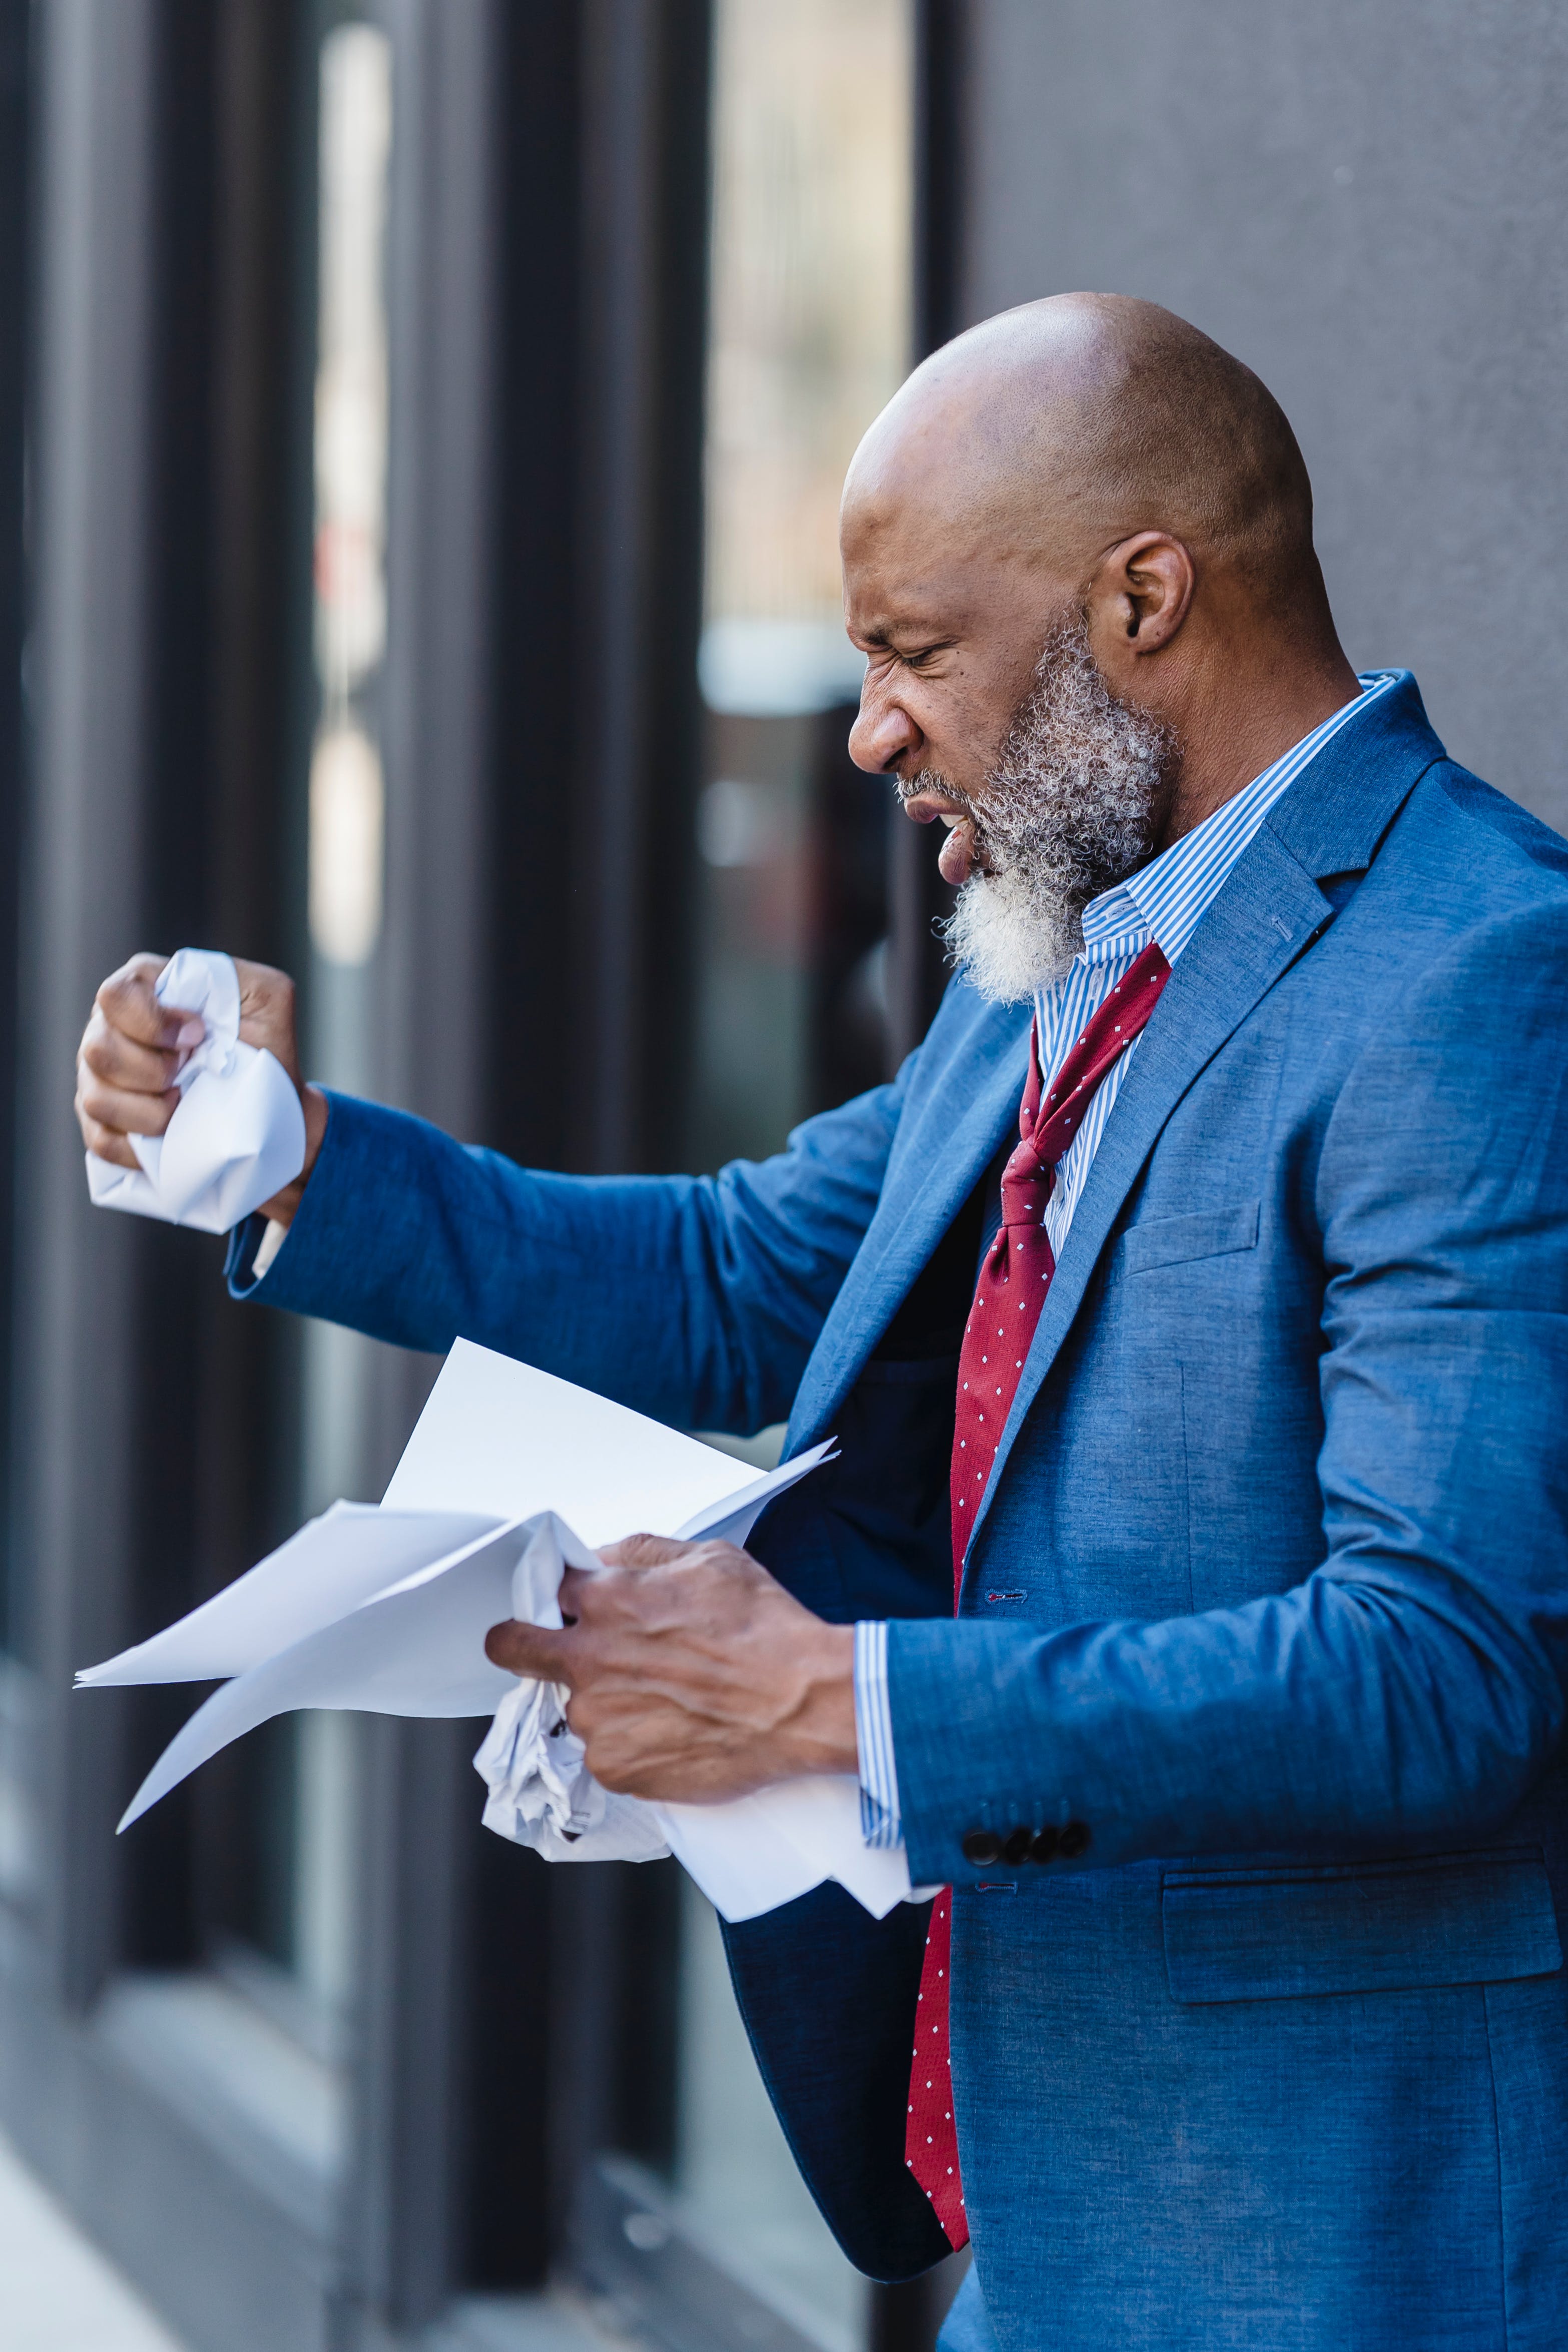 An angry man standing outside crumpling papers in his hand | Source: Pexels